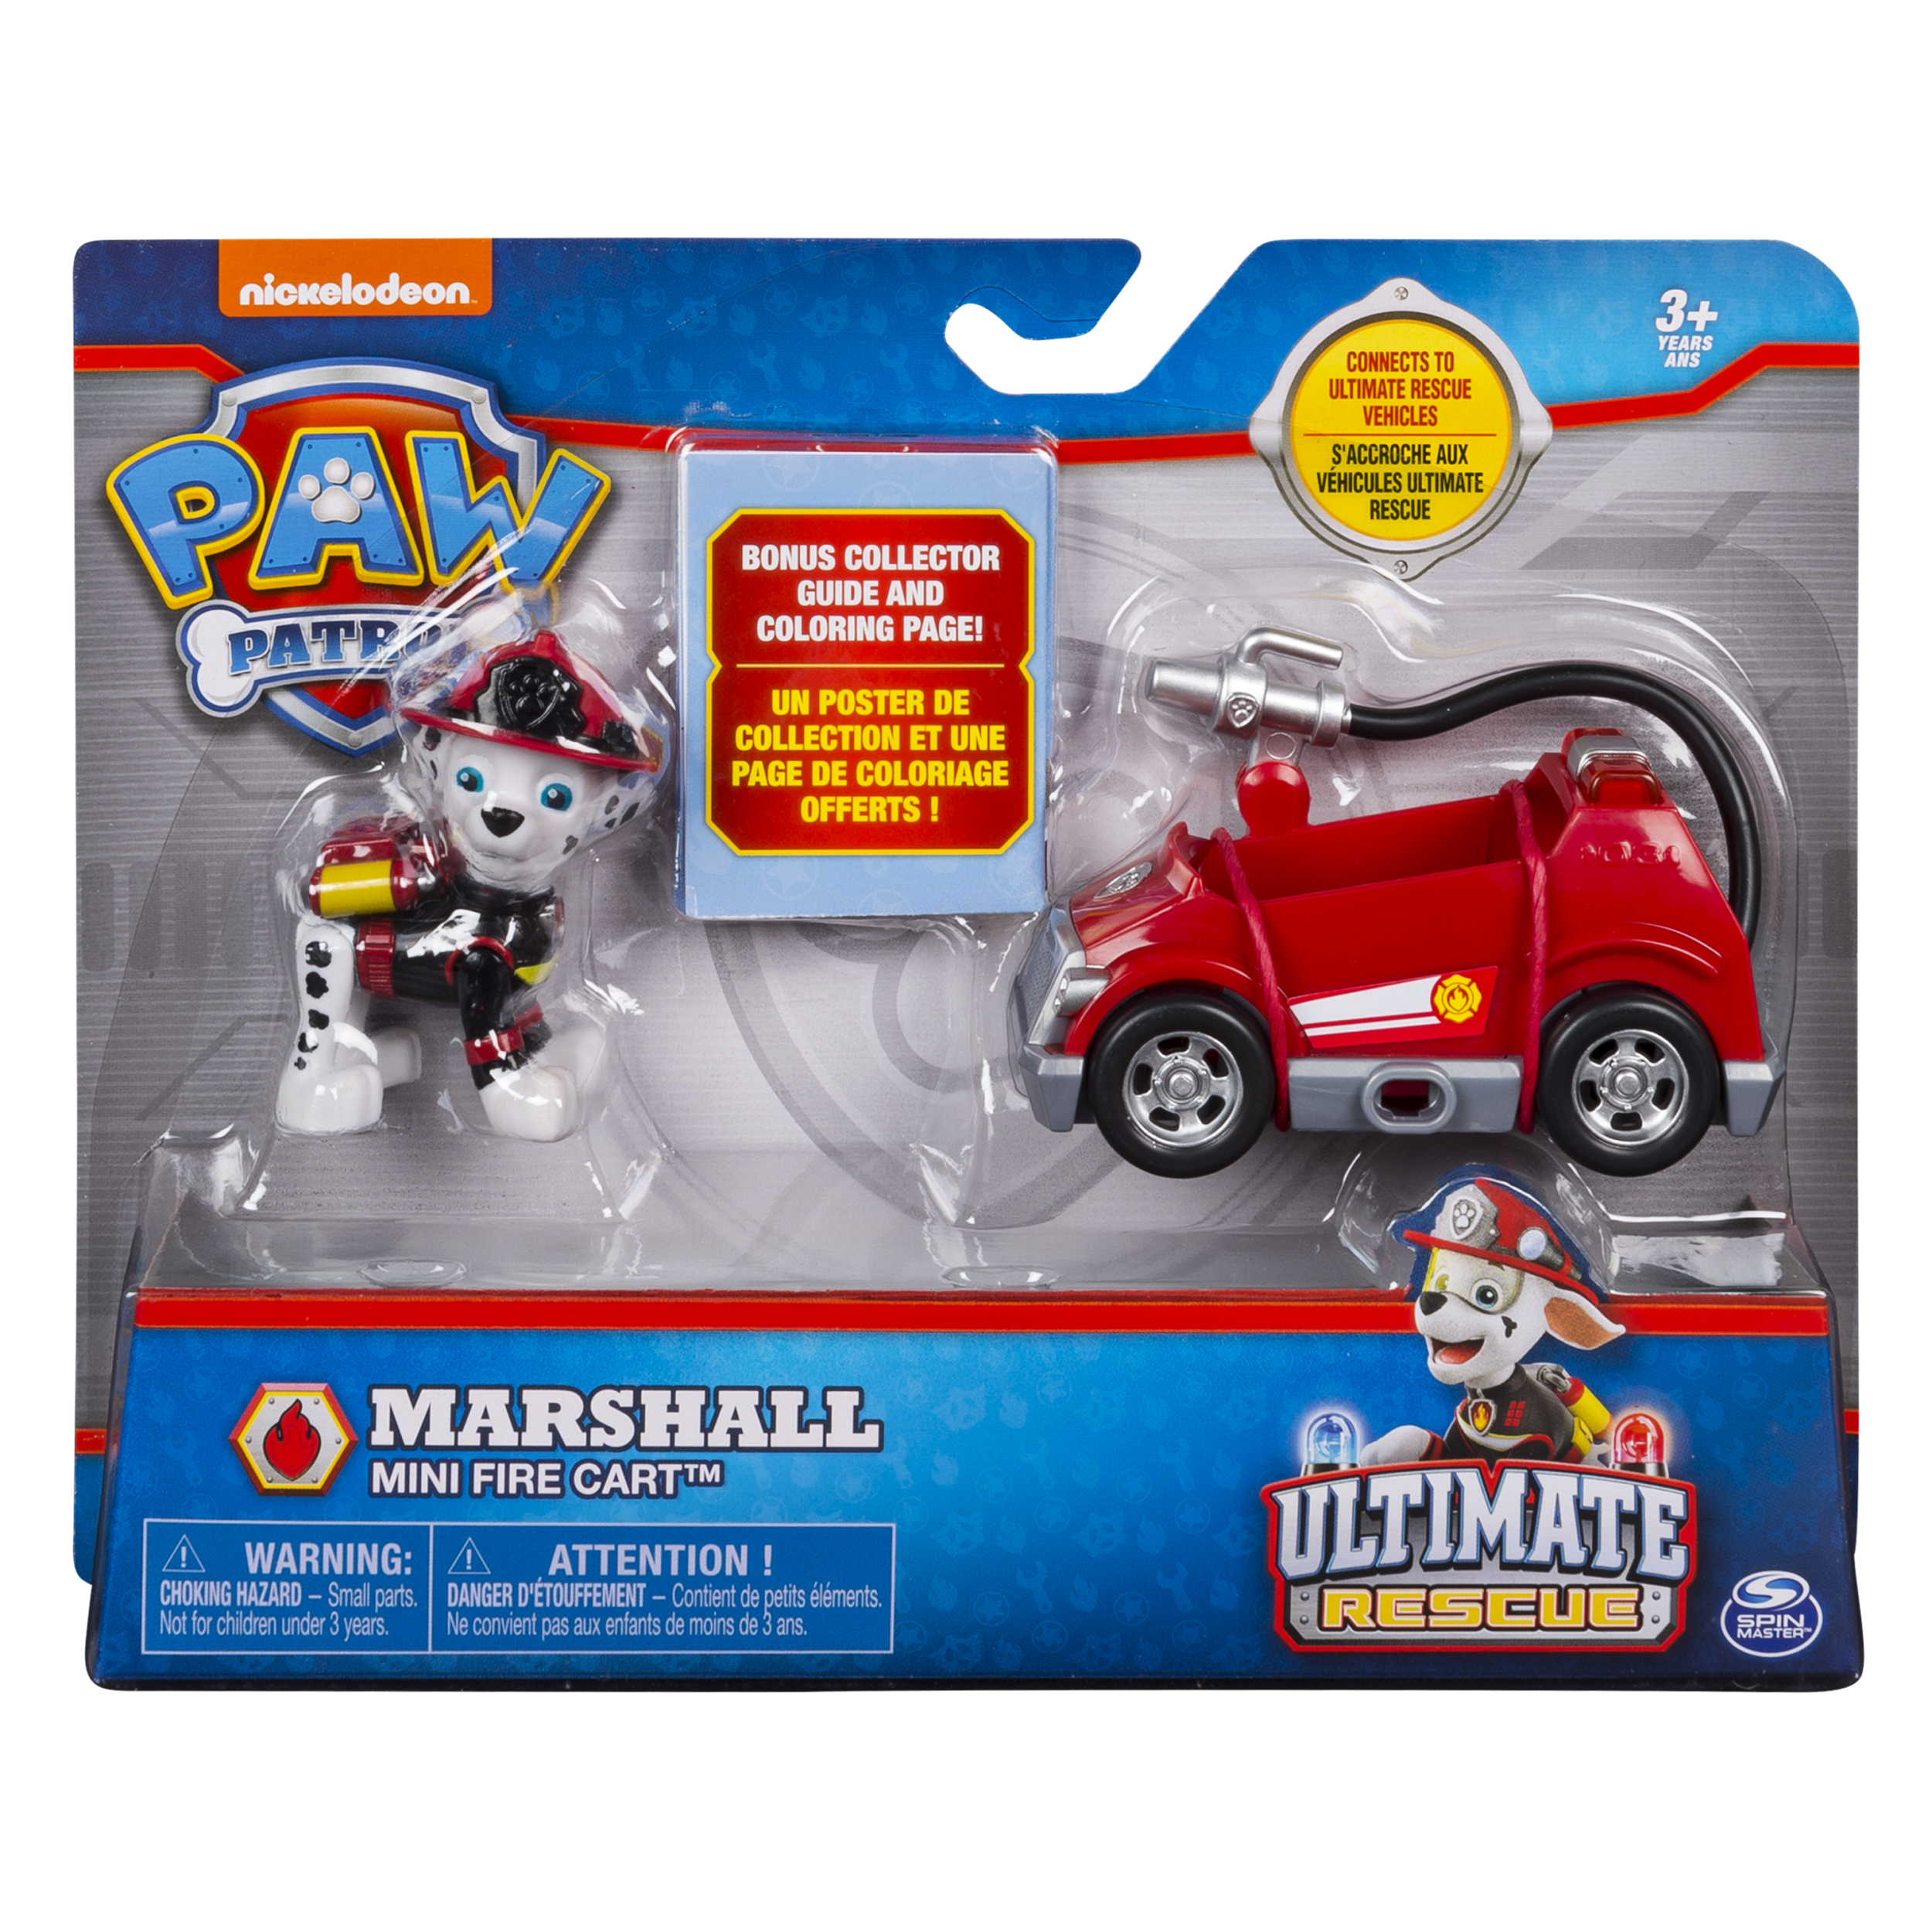 PAW Patrol Ultimate Rescue, Marshall’s Mini Fire Cart with Collectible Figure, for Ages 3 and Up - image 2 of 6